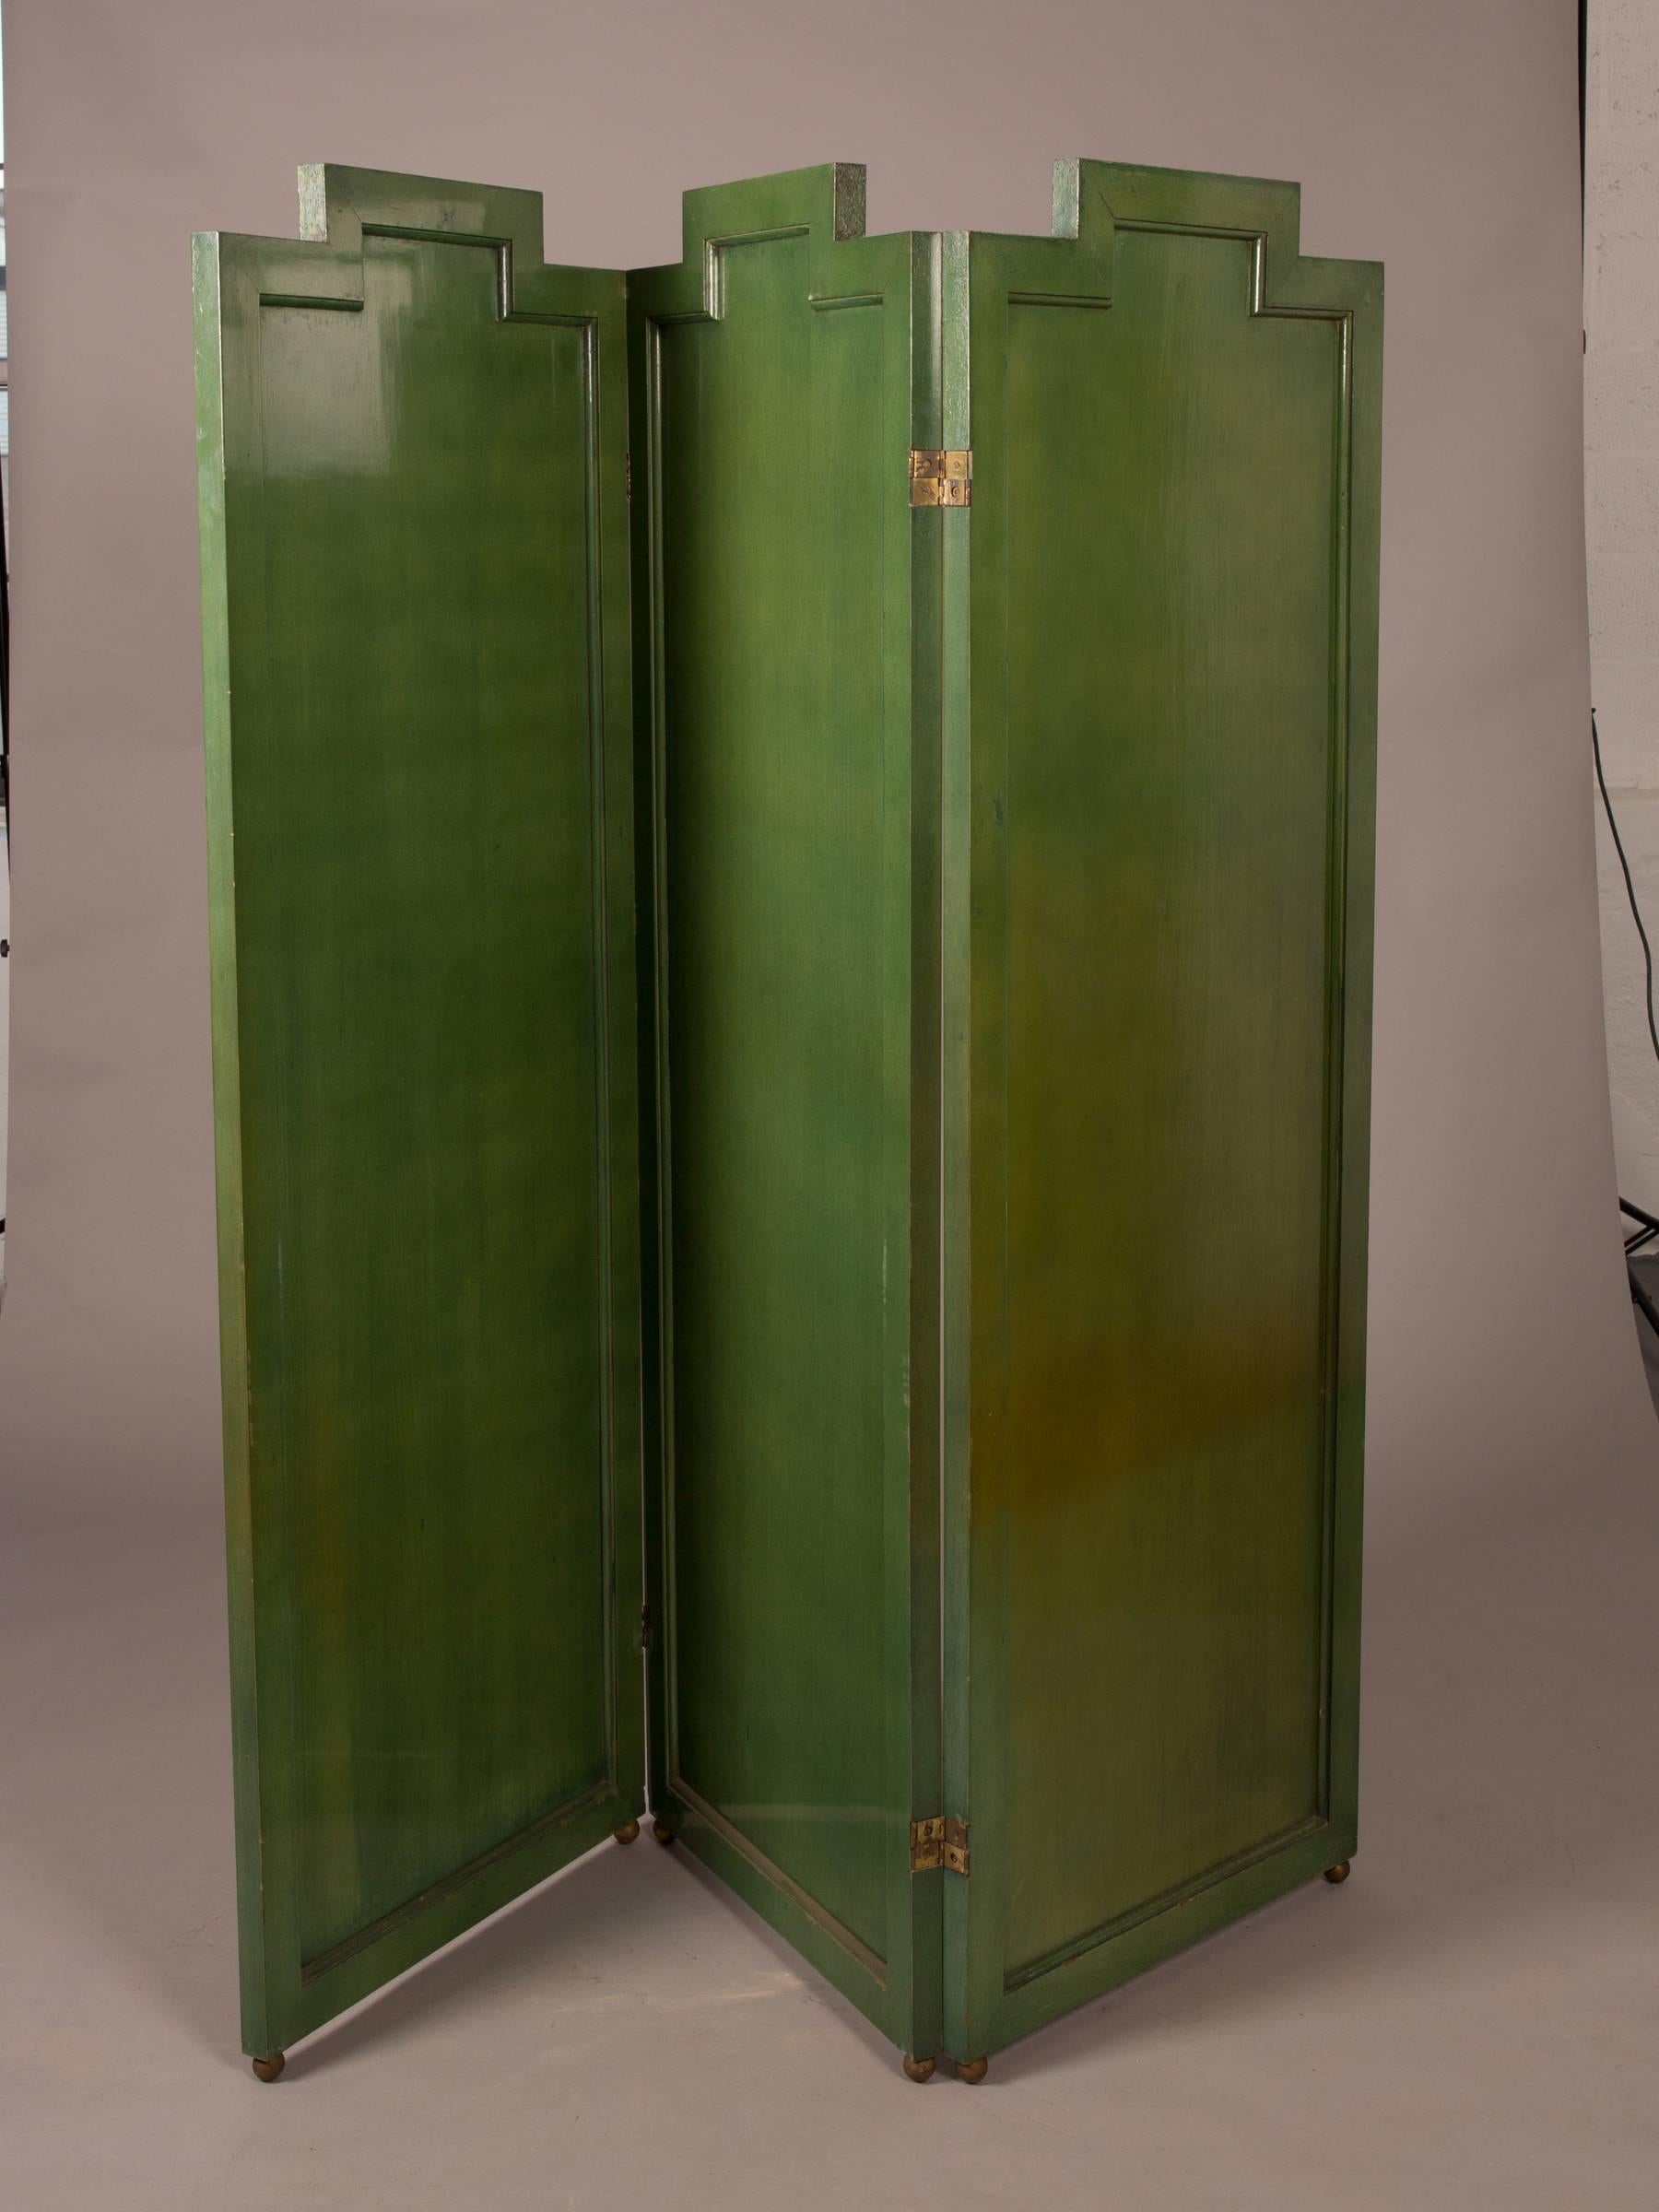 Fabulous green lacquered three panel Art Deco folding screen with decorative brass and copper inlaid design and brass hinges. Each panel measures 25.5